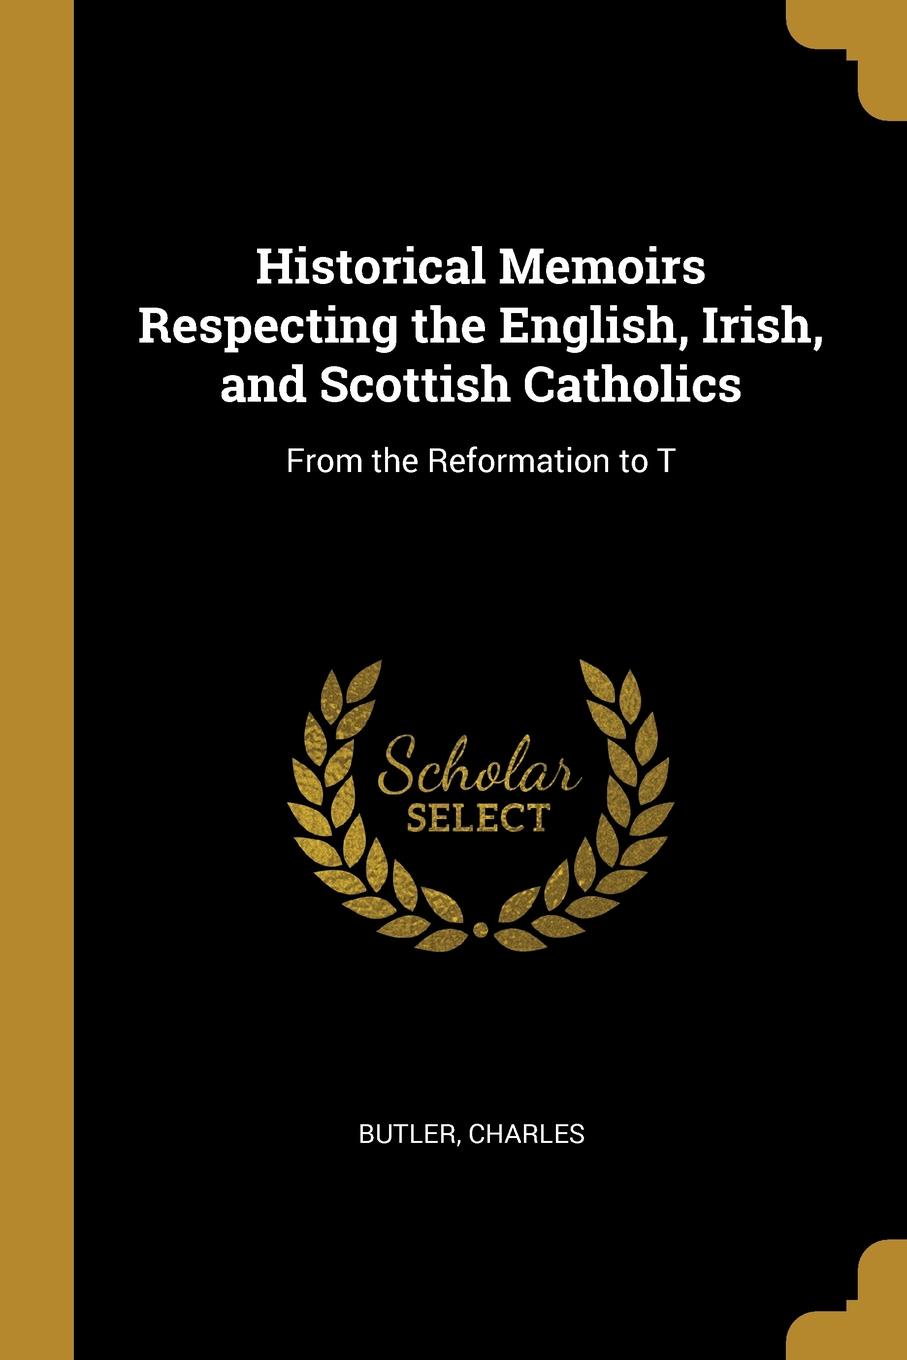 Historical Memoirs Respecting the English, Irish, and Scottish Catholics. From the Reformation to T